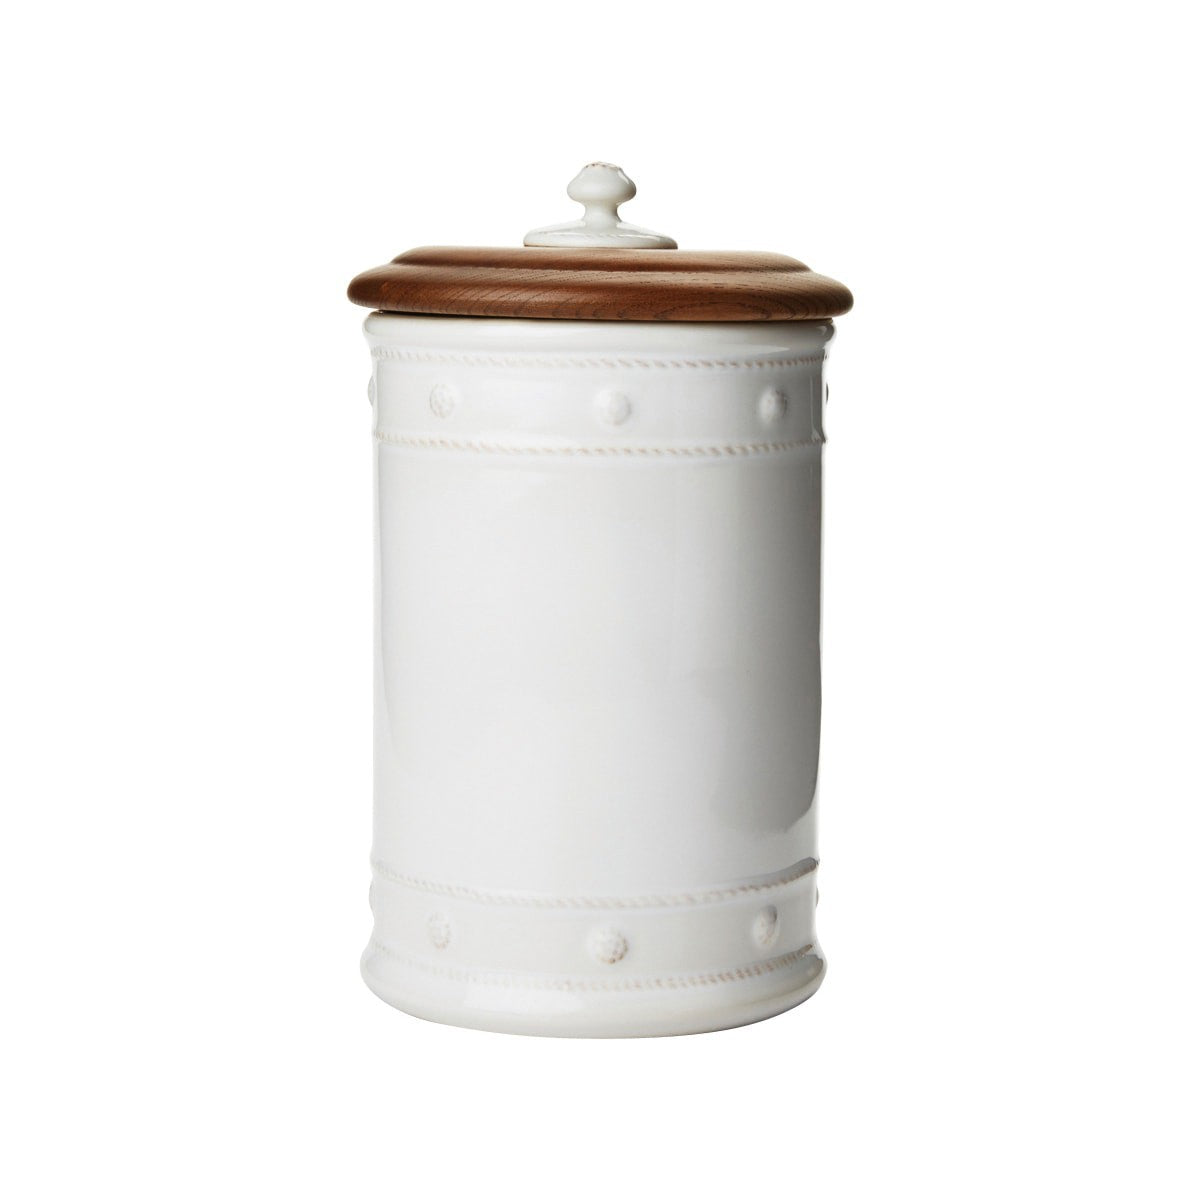 Berry & Thread Whitewash 11.5" Canister with Wooden Lid